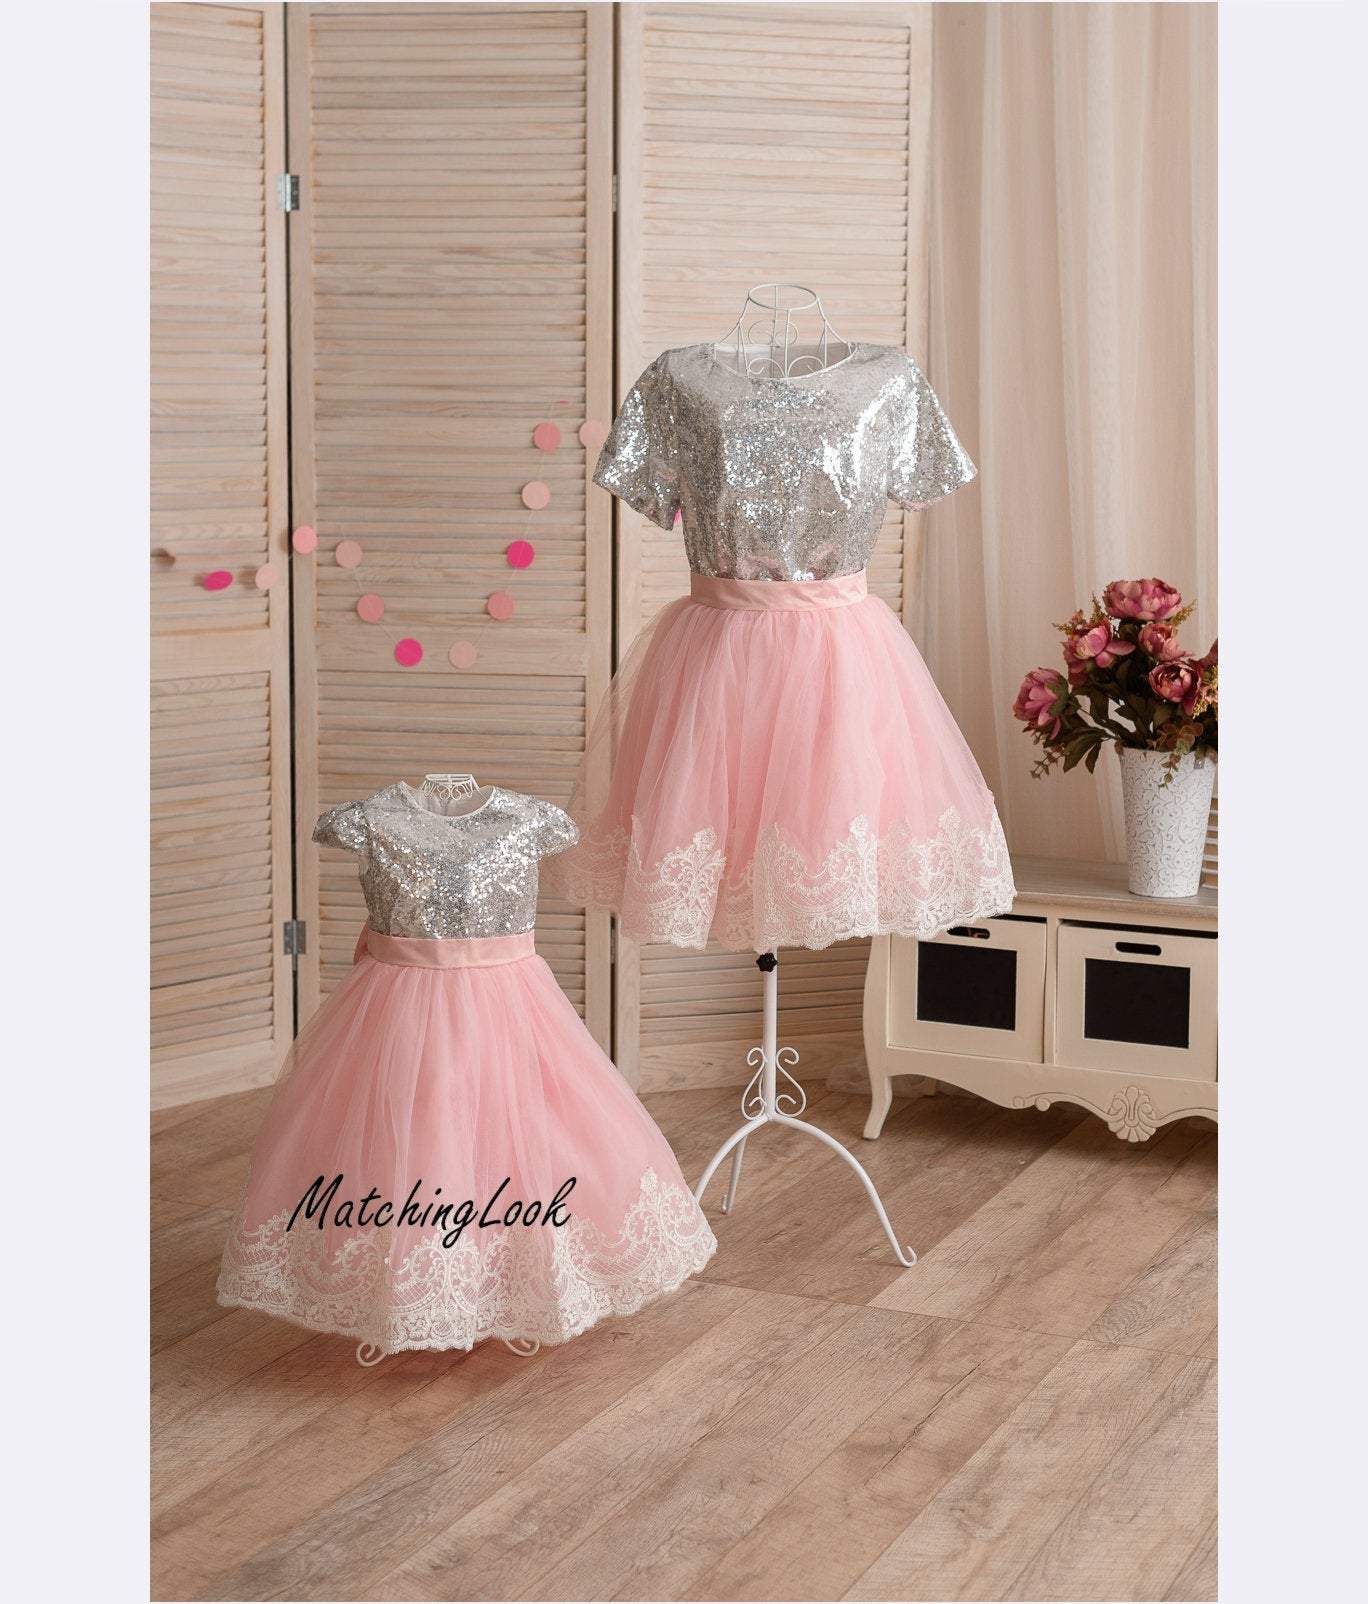 birthday dresses for mother and daughter